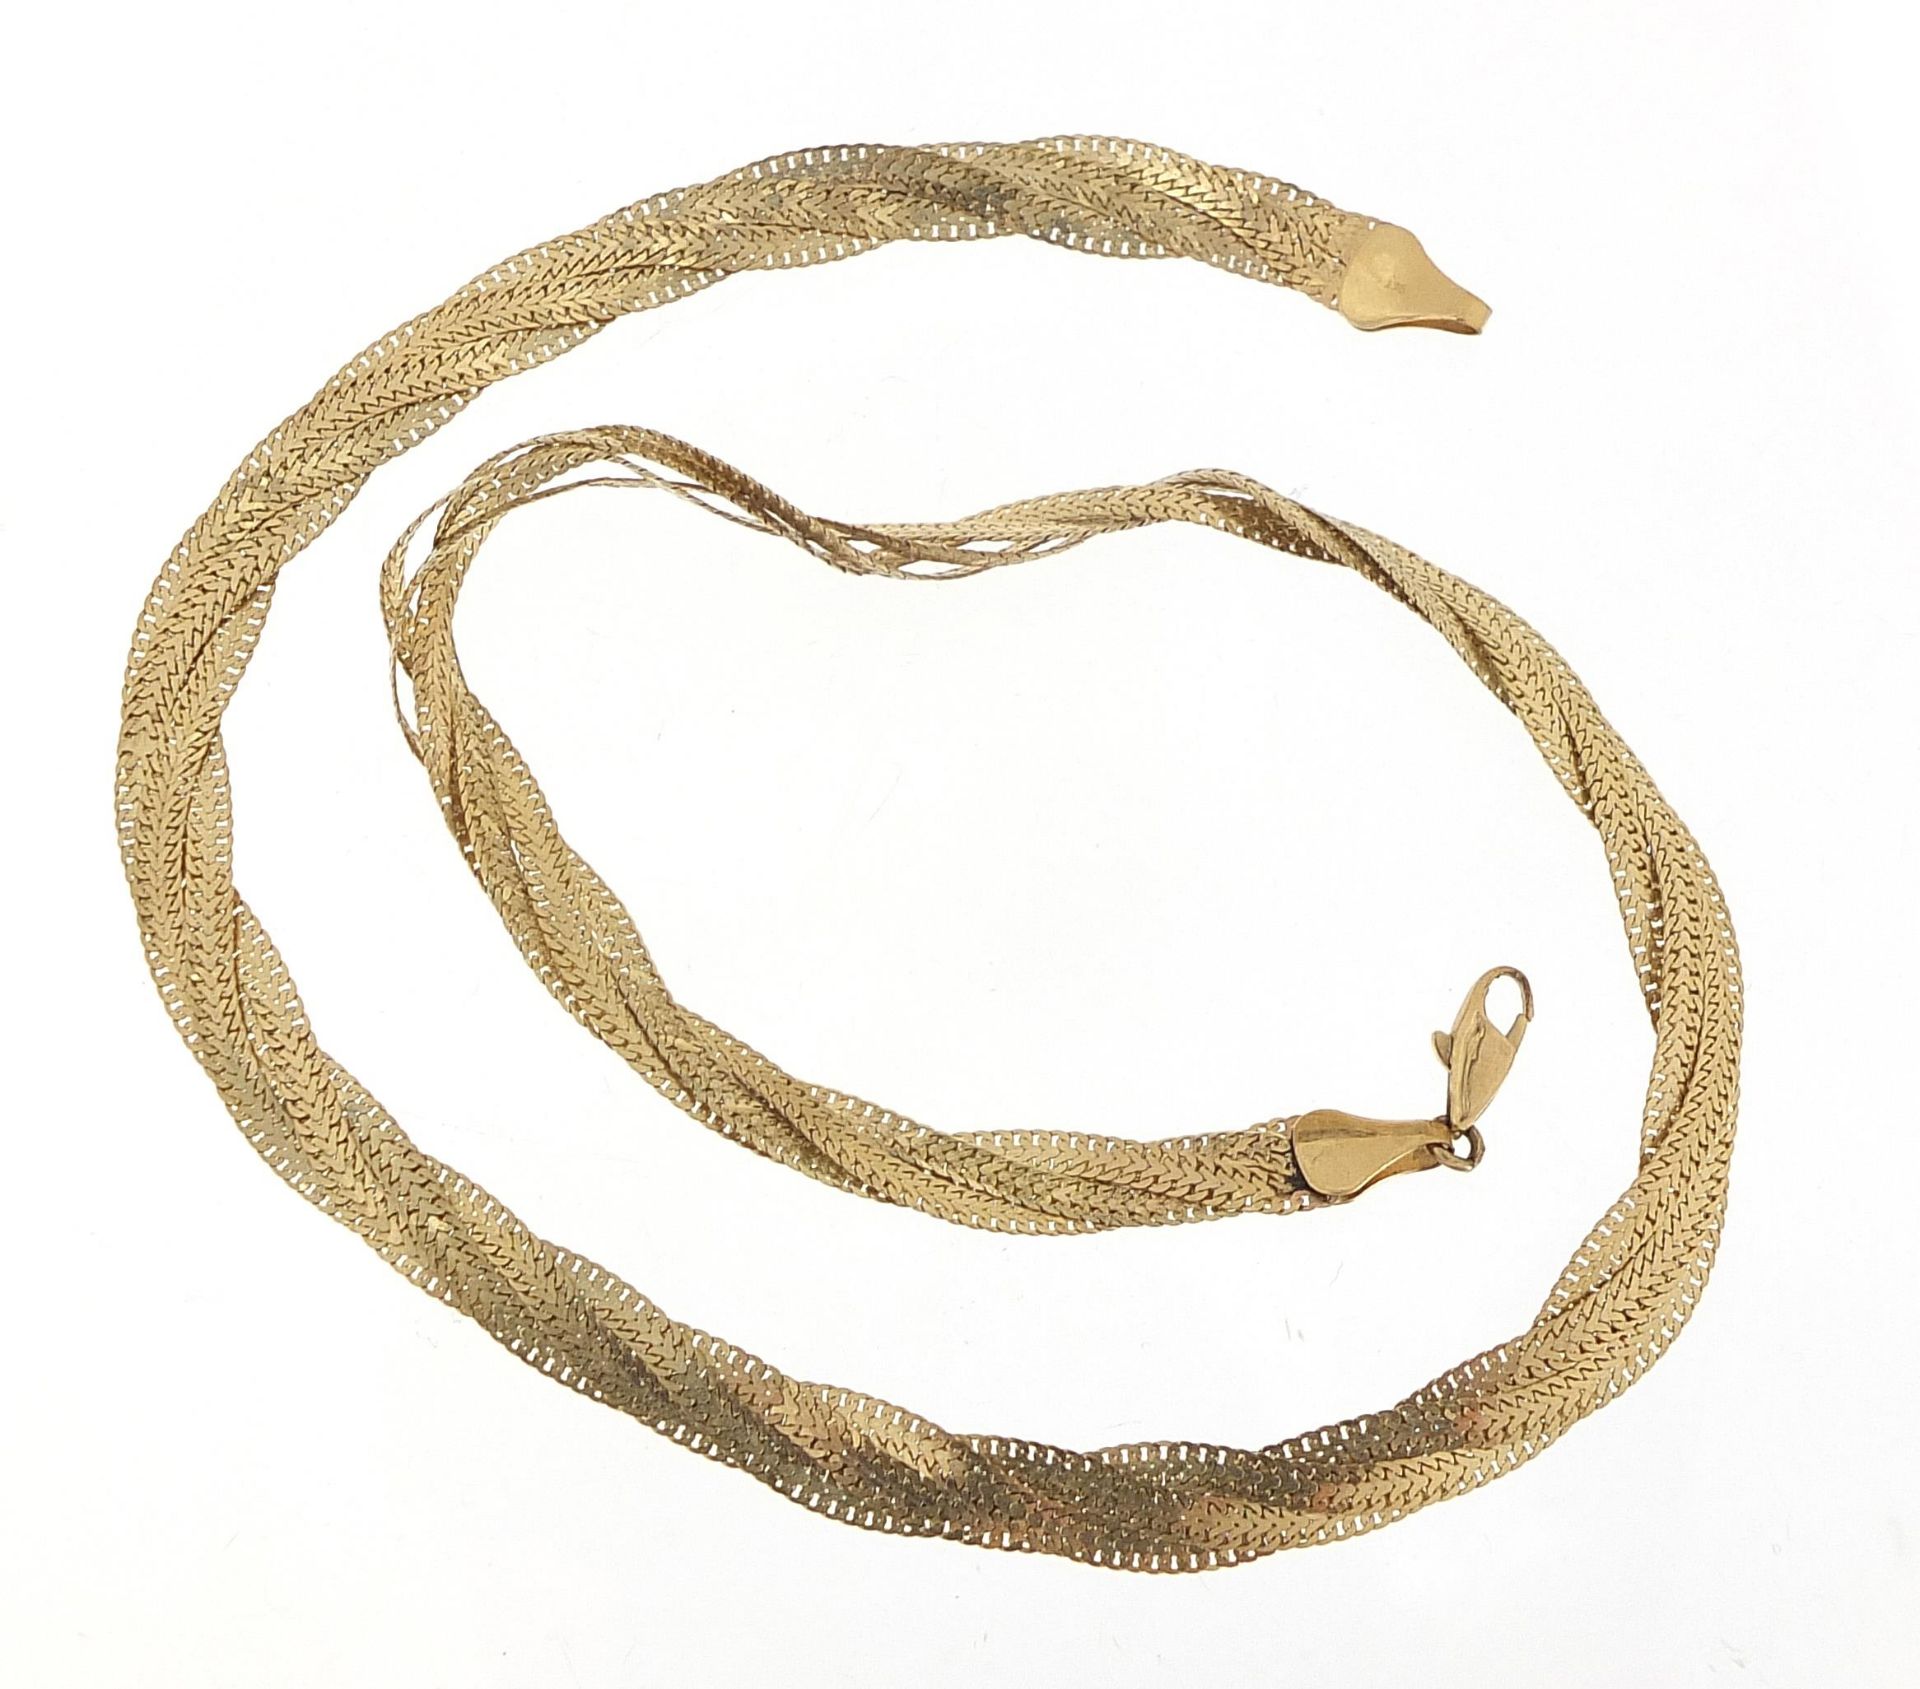 9ct gold four row weave design necklace, 40cm in length, 11.4g - Image 2 of 3